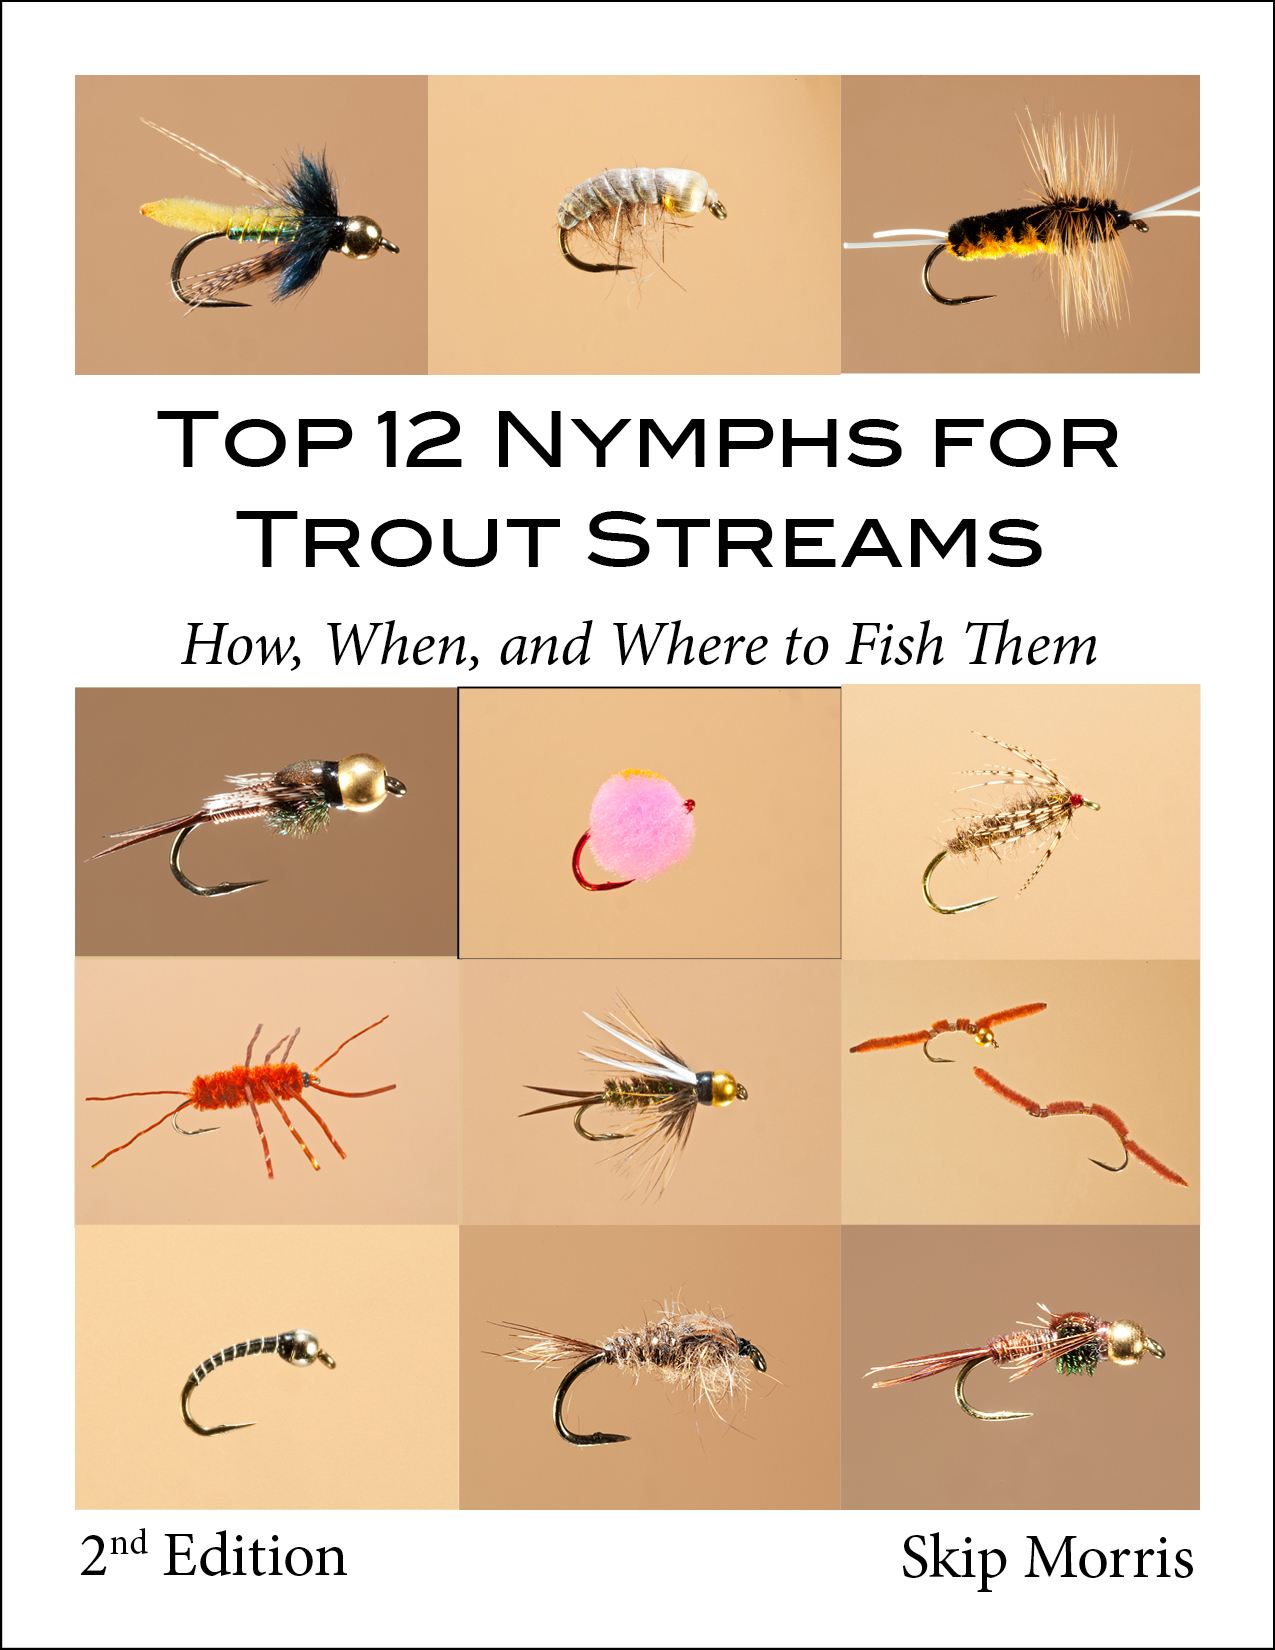 Top 12 Nymphs, 2nd Edition, by Skip Morris